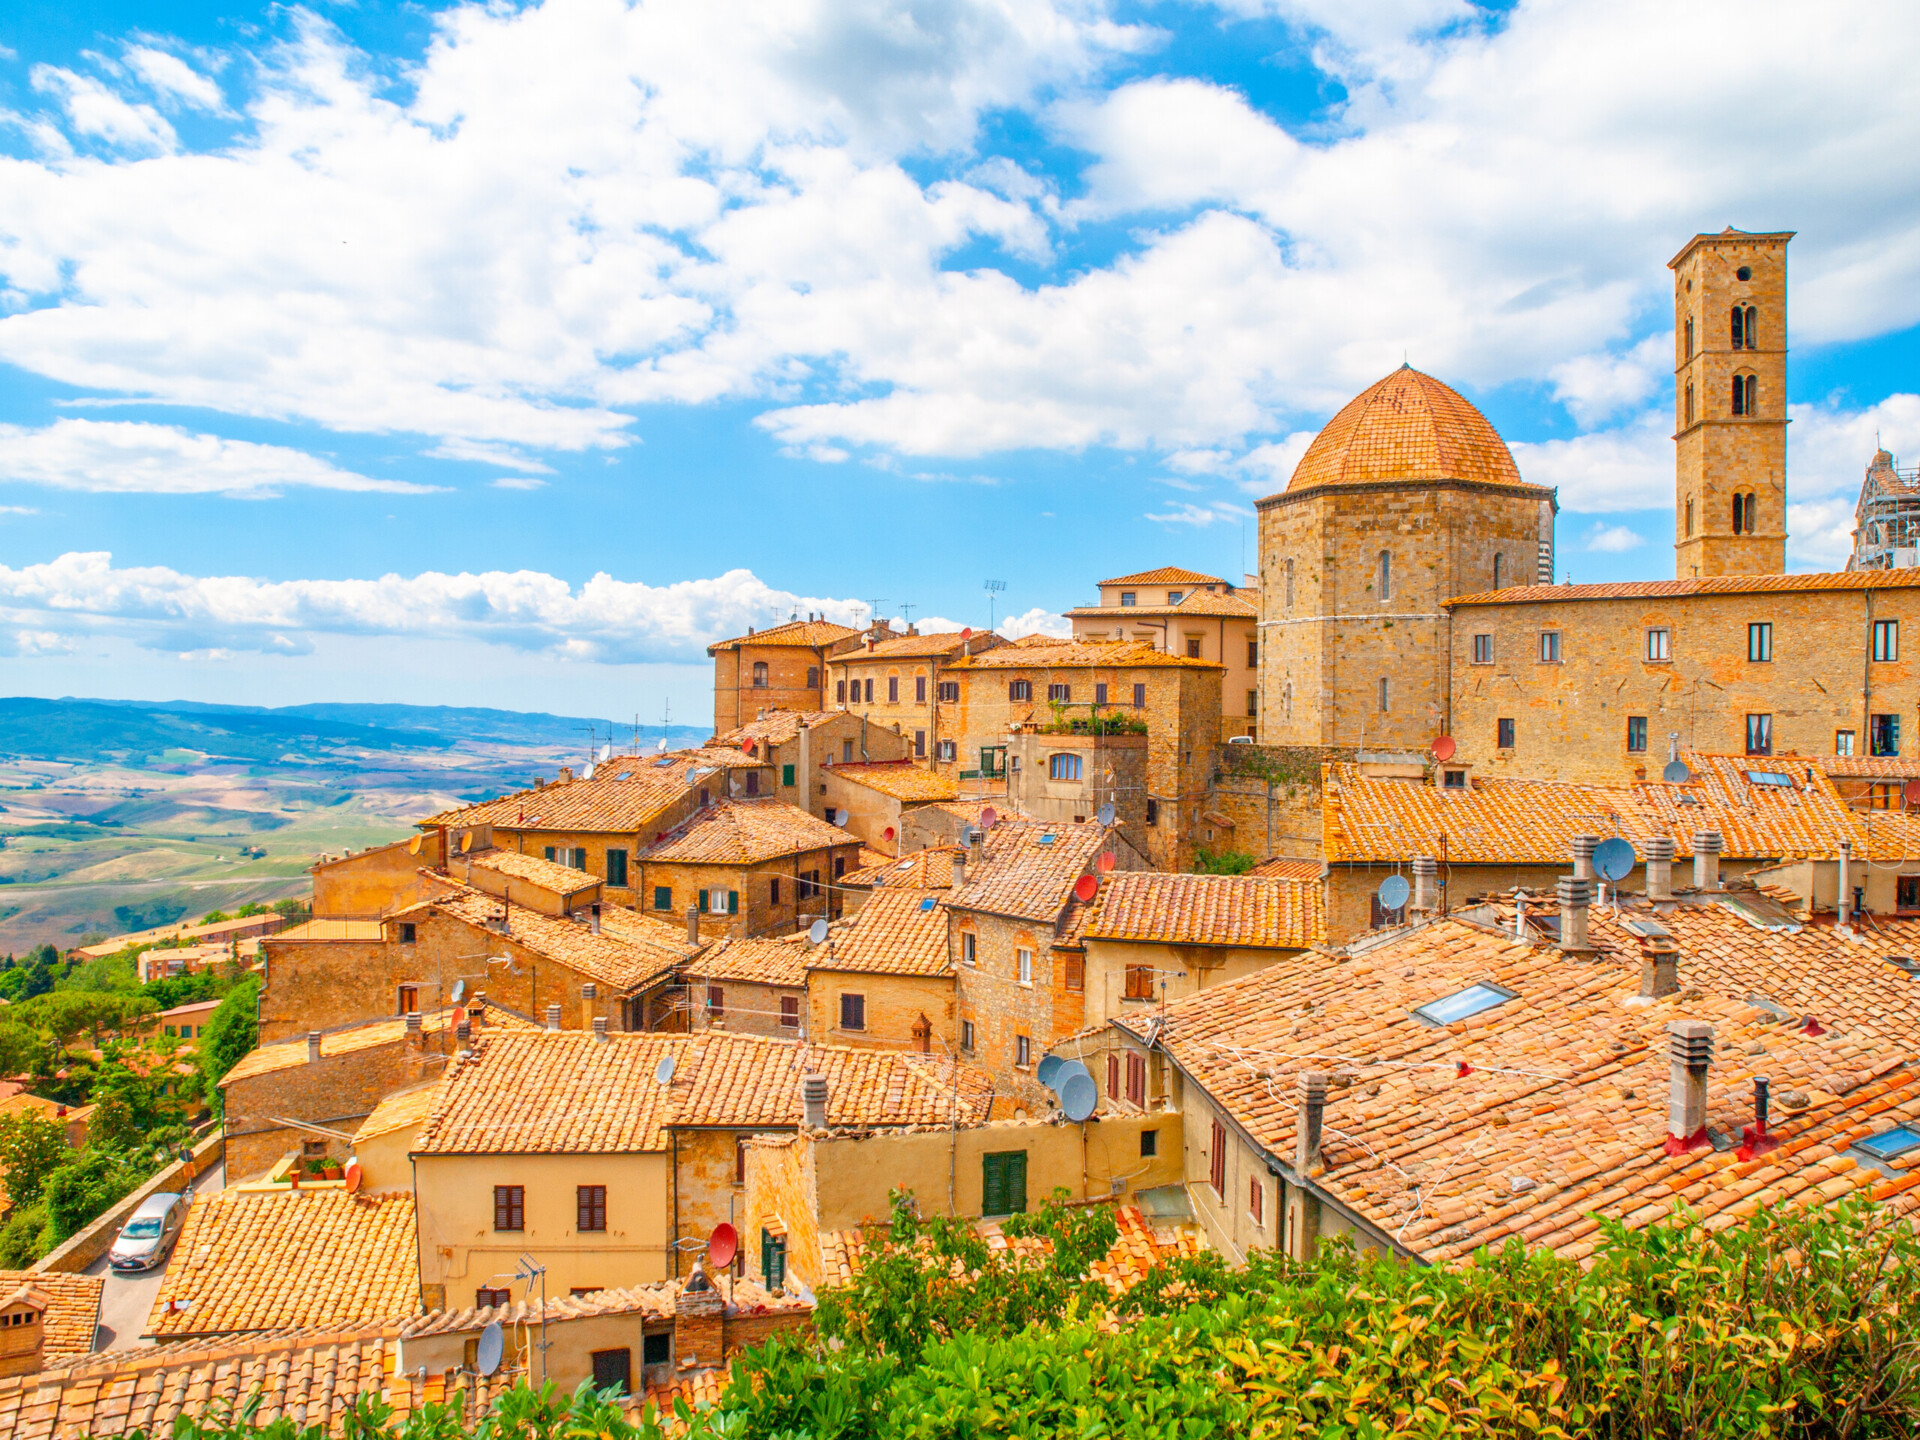 Panoramic view of Volterra - medieval Tuscan town with old houses, towers and churches, Tuscany, Italy.